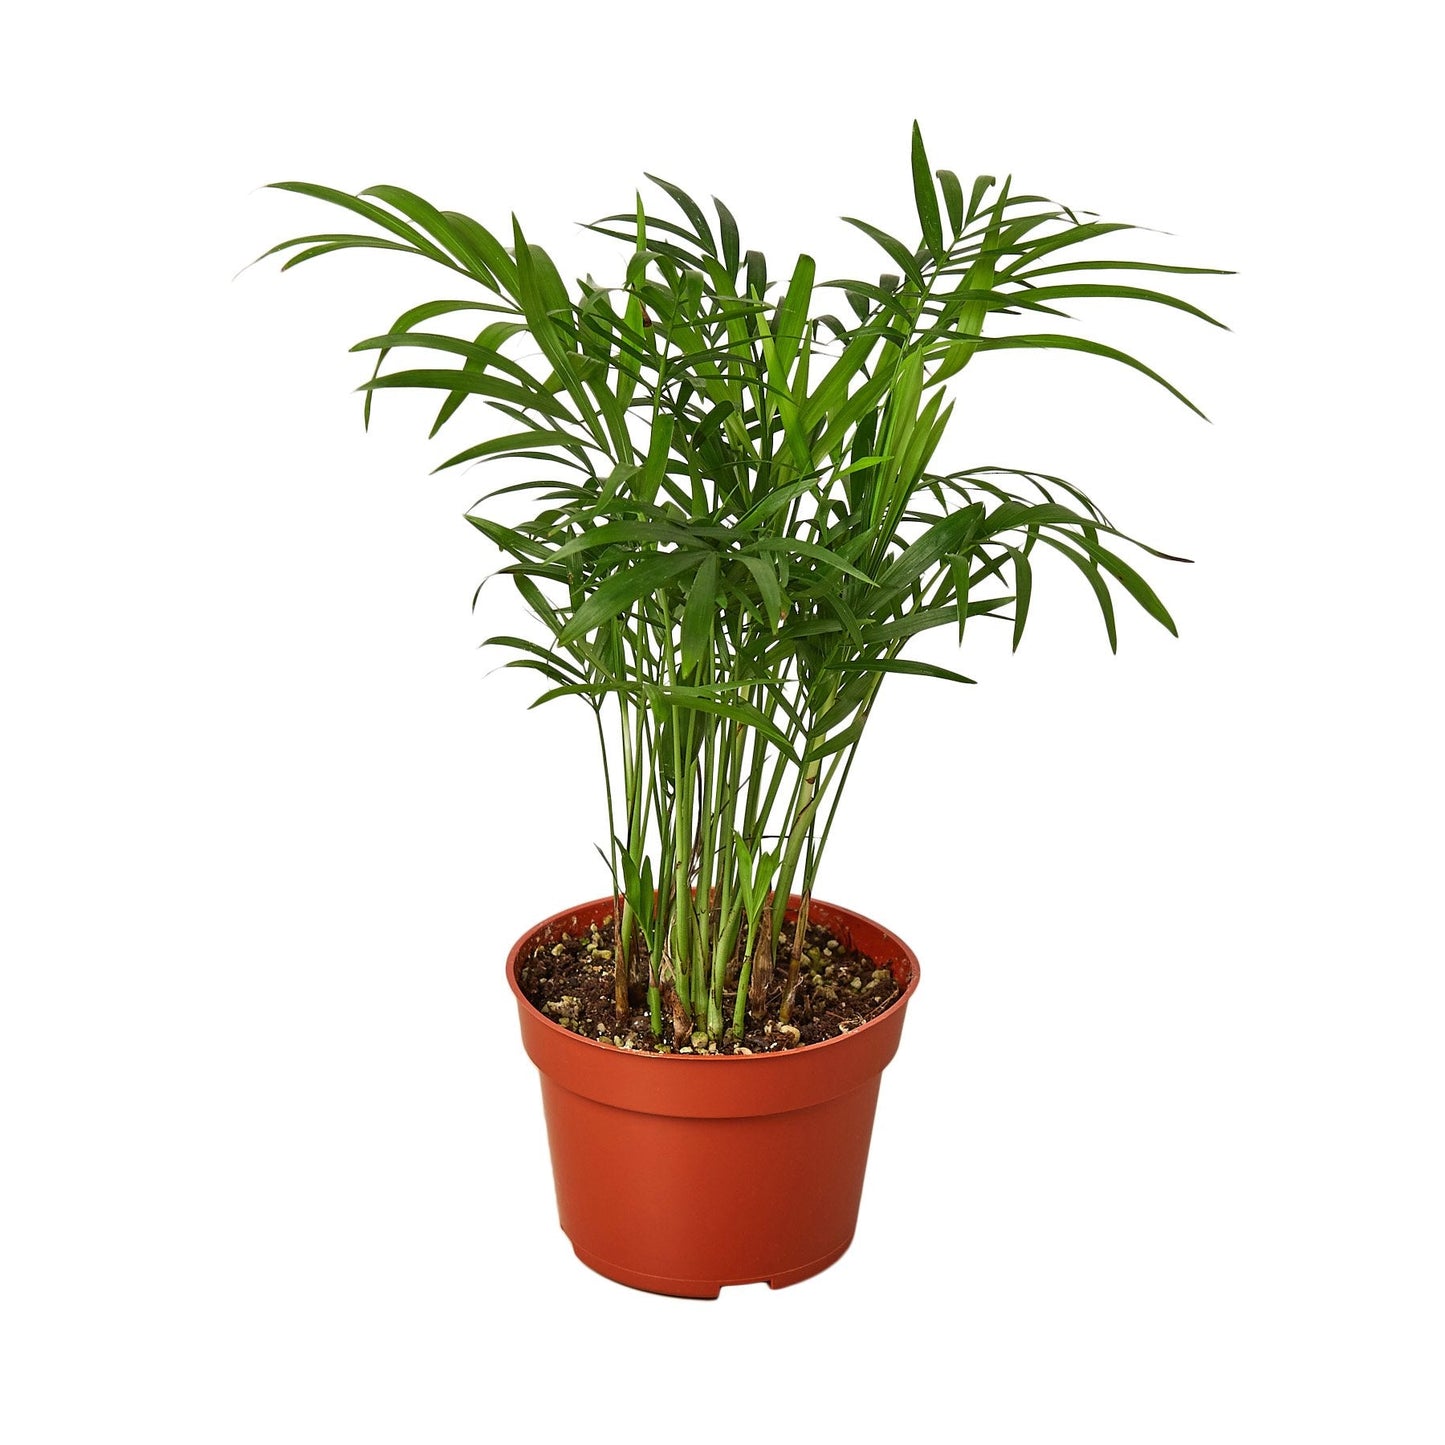 Parlor Palm - Small